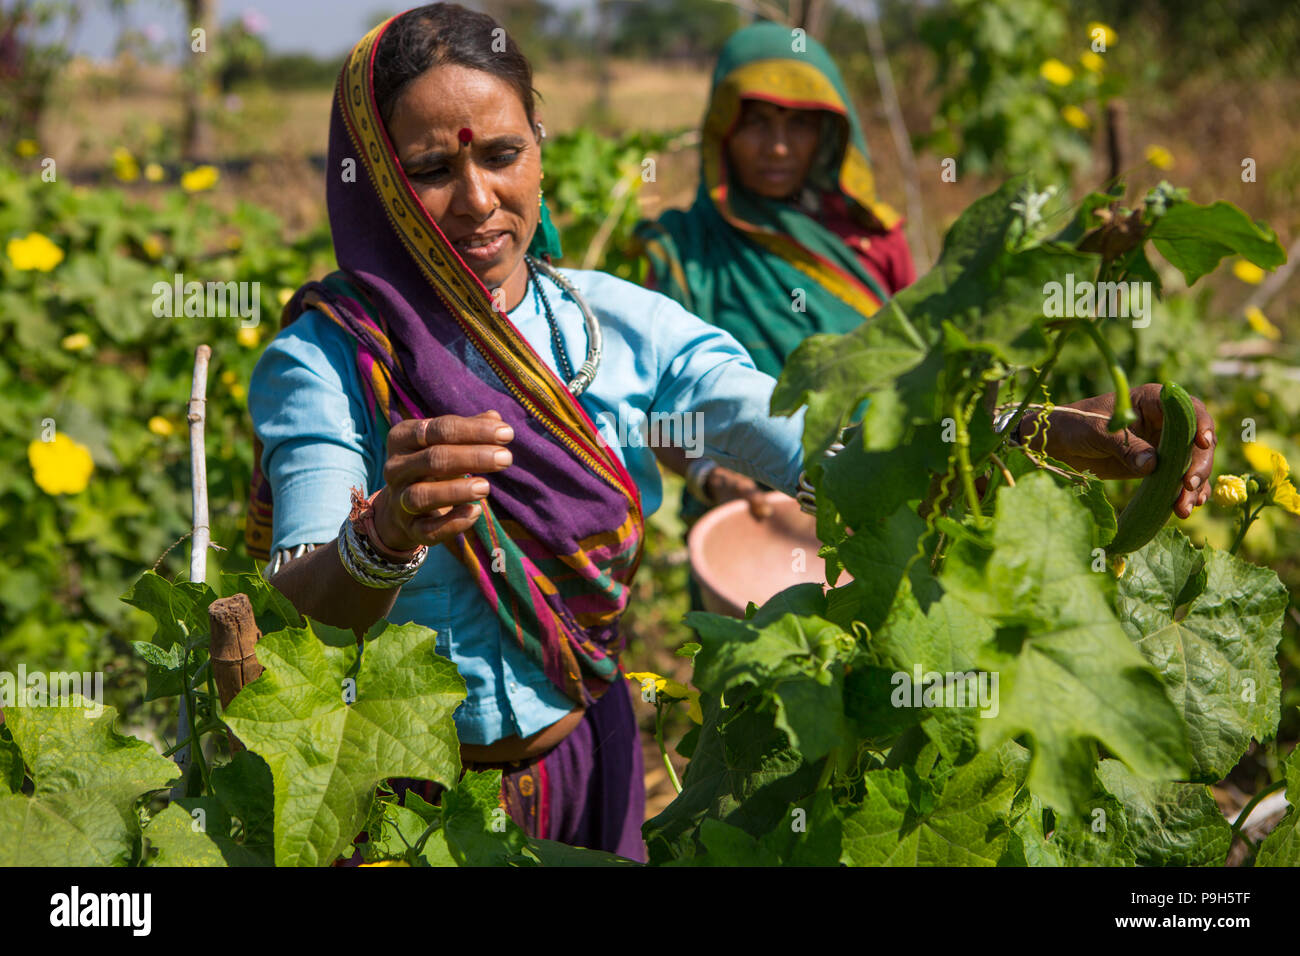 A woman picking some vegetables on her farm in Sendhwa, India. Stock Photo